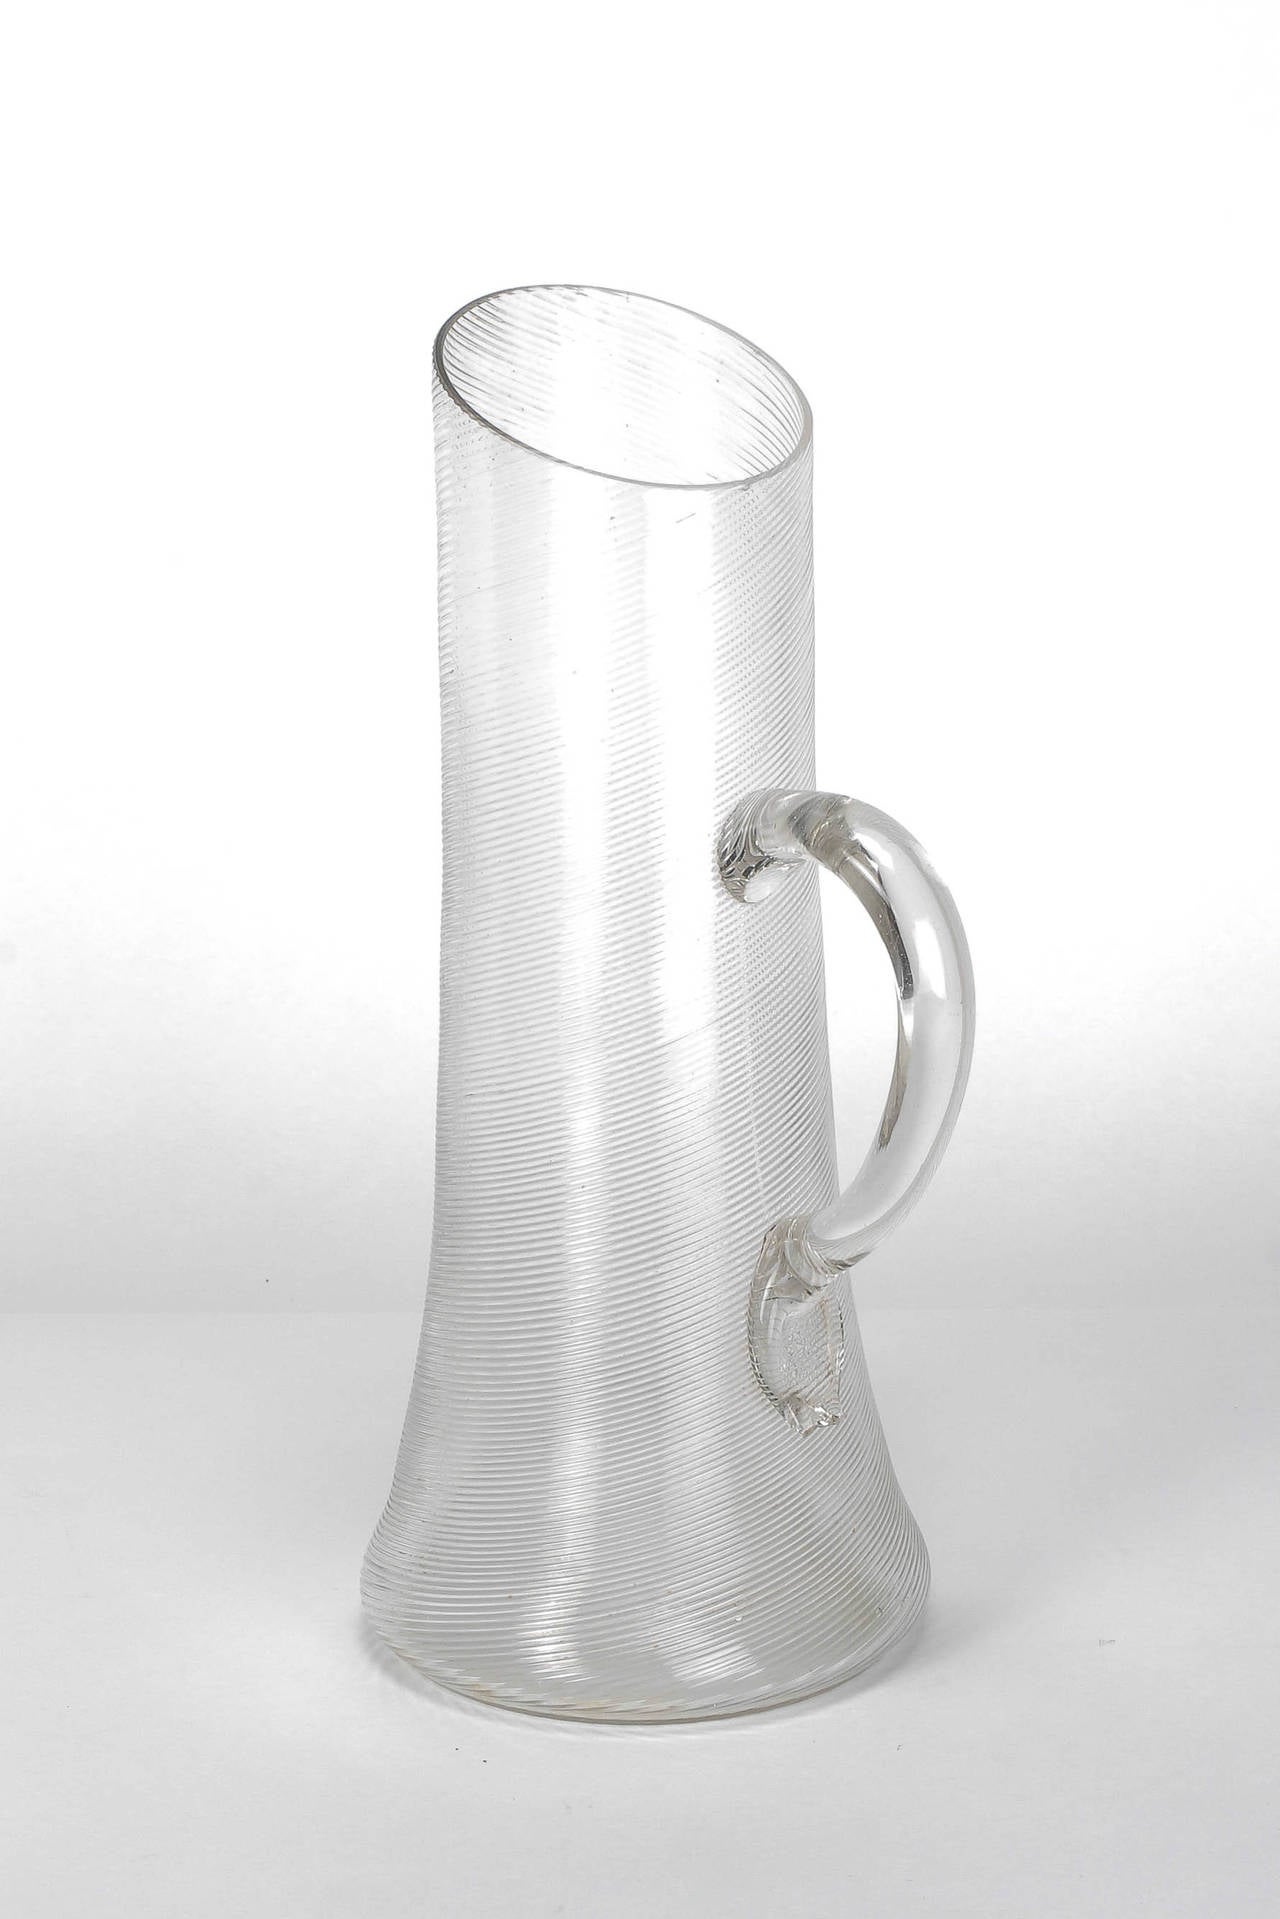 Stunning mouth-blown filigrana glass jar by Venini in the 1930s, Italy. Very fine ribbed glass, beautiful shape with a organically shaped handle